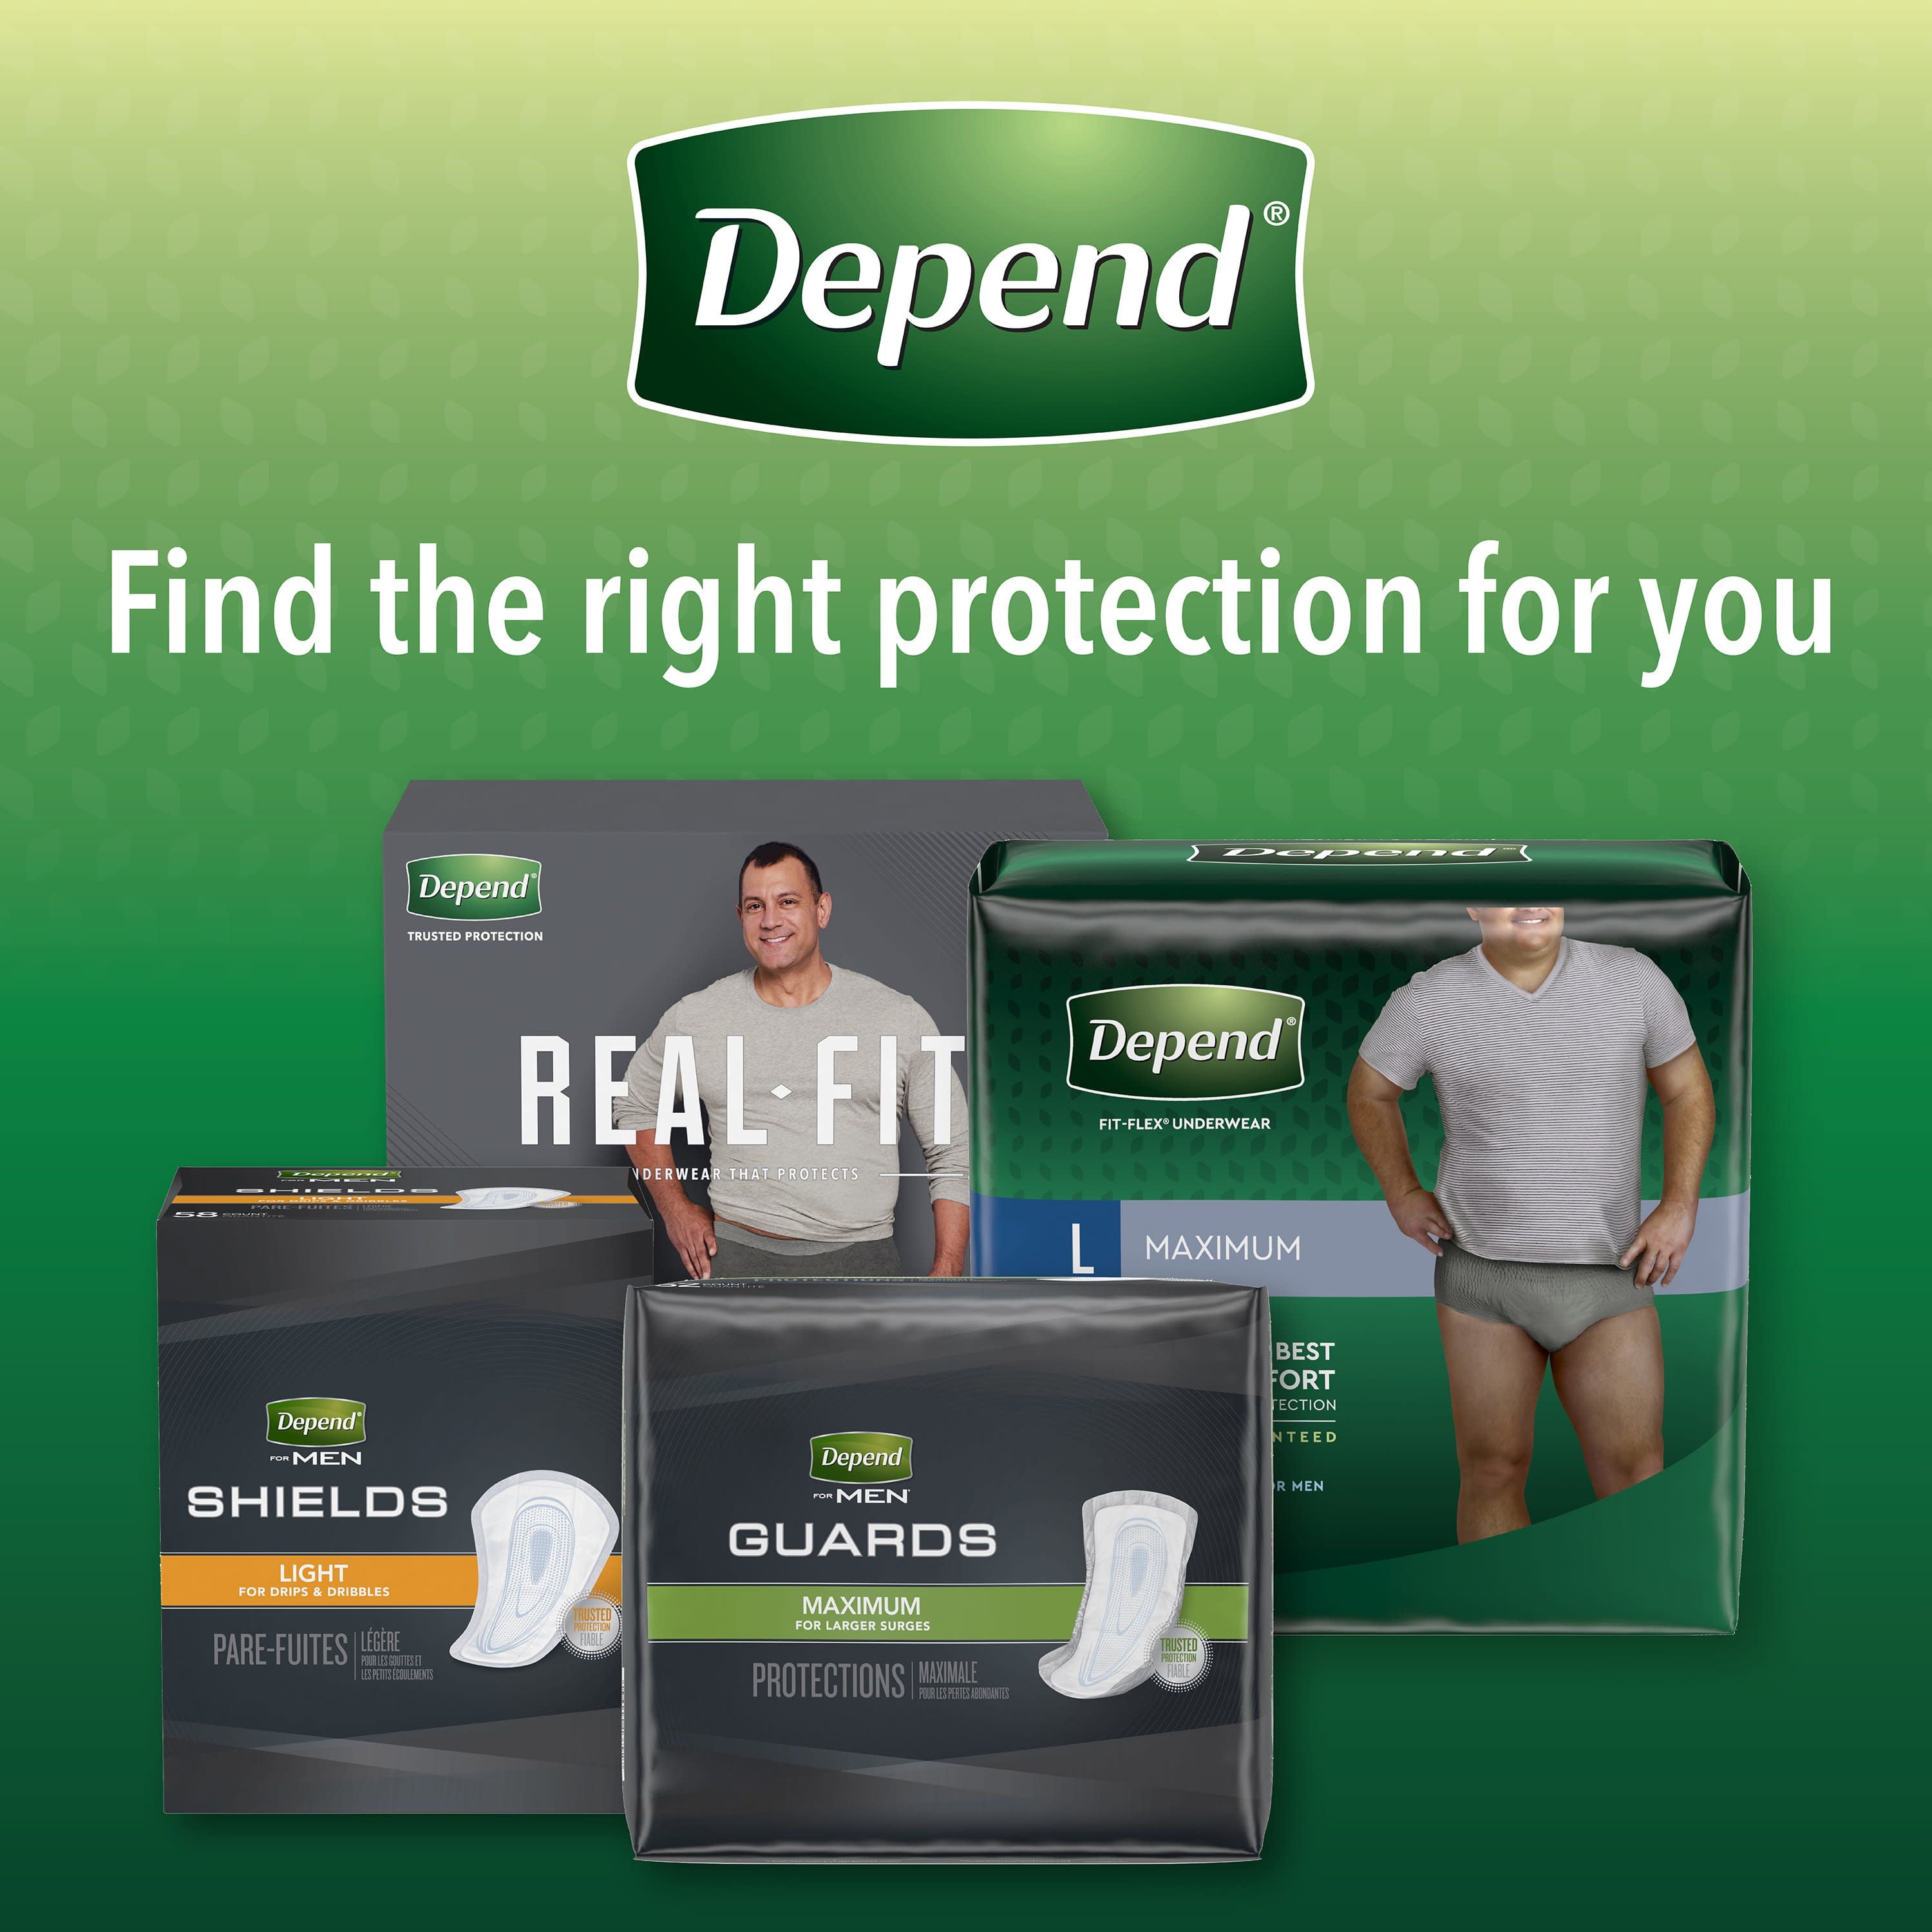 Depend Fresh Protection Adult Incontinence Underwear Maximum Absorbency  Extra-Large Blush Underwear, 26 count - Harris Teeter